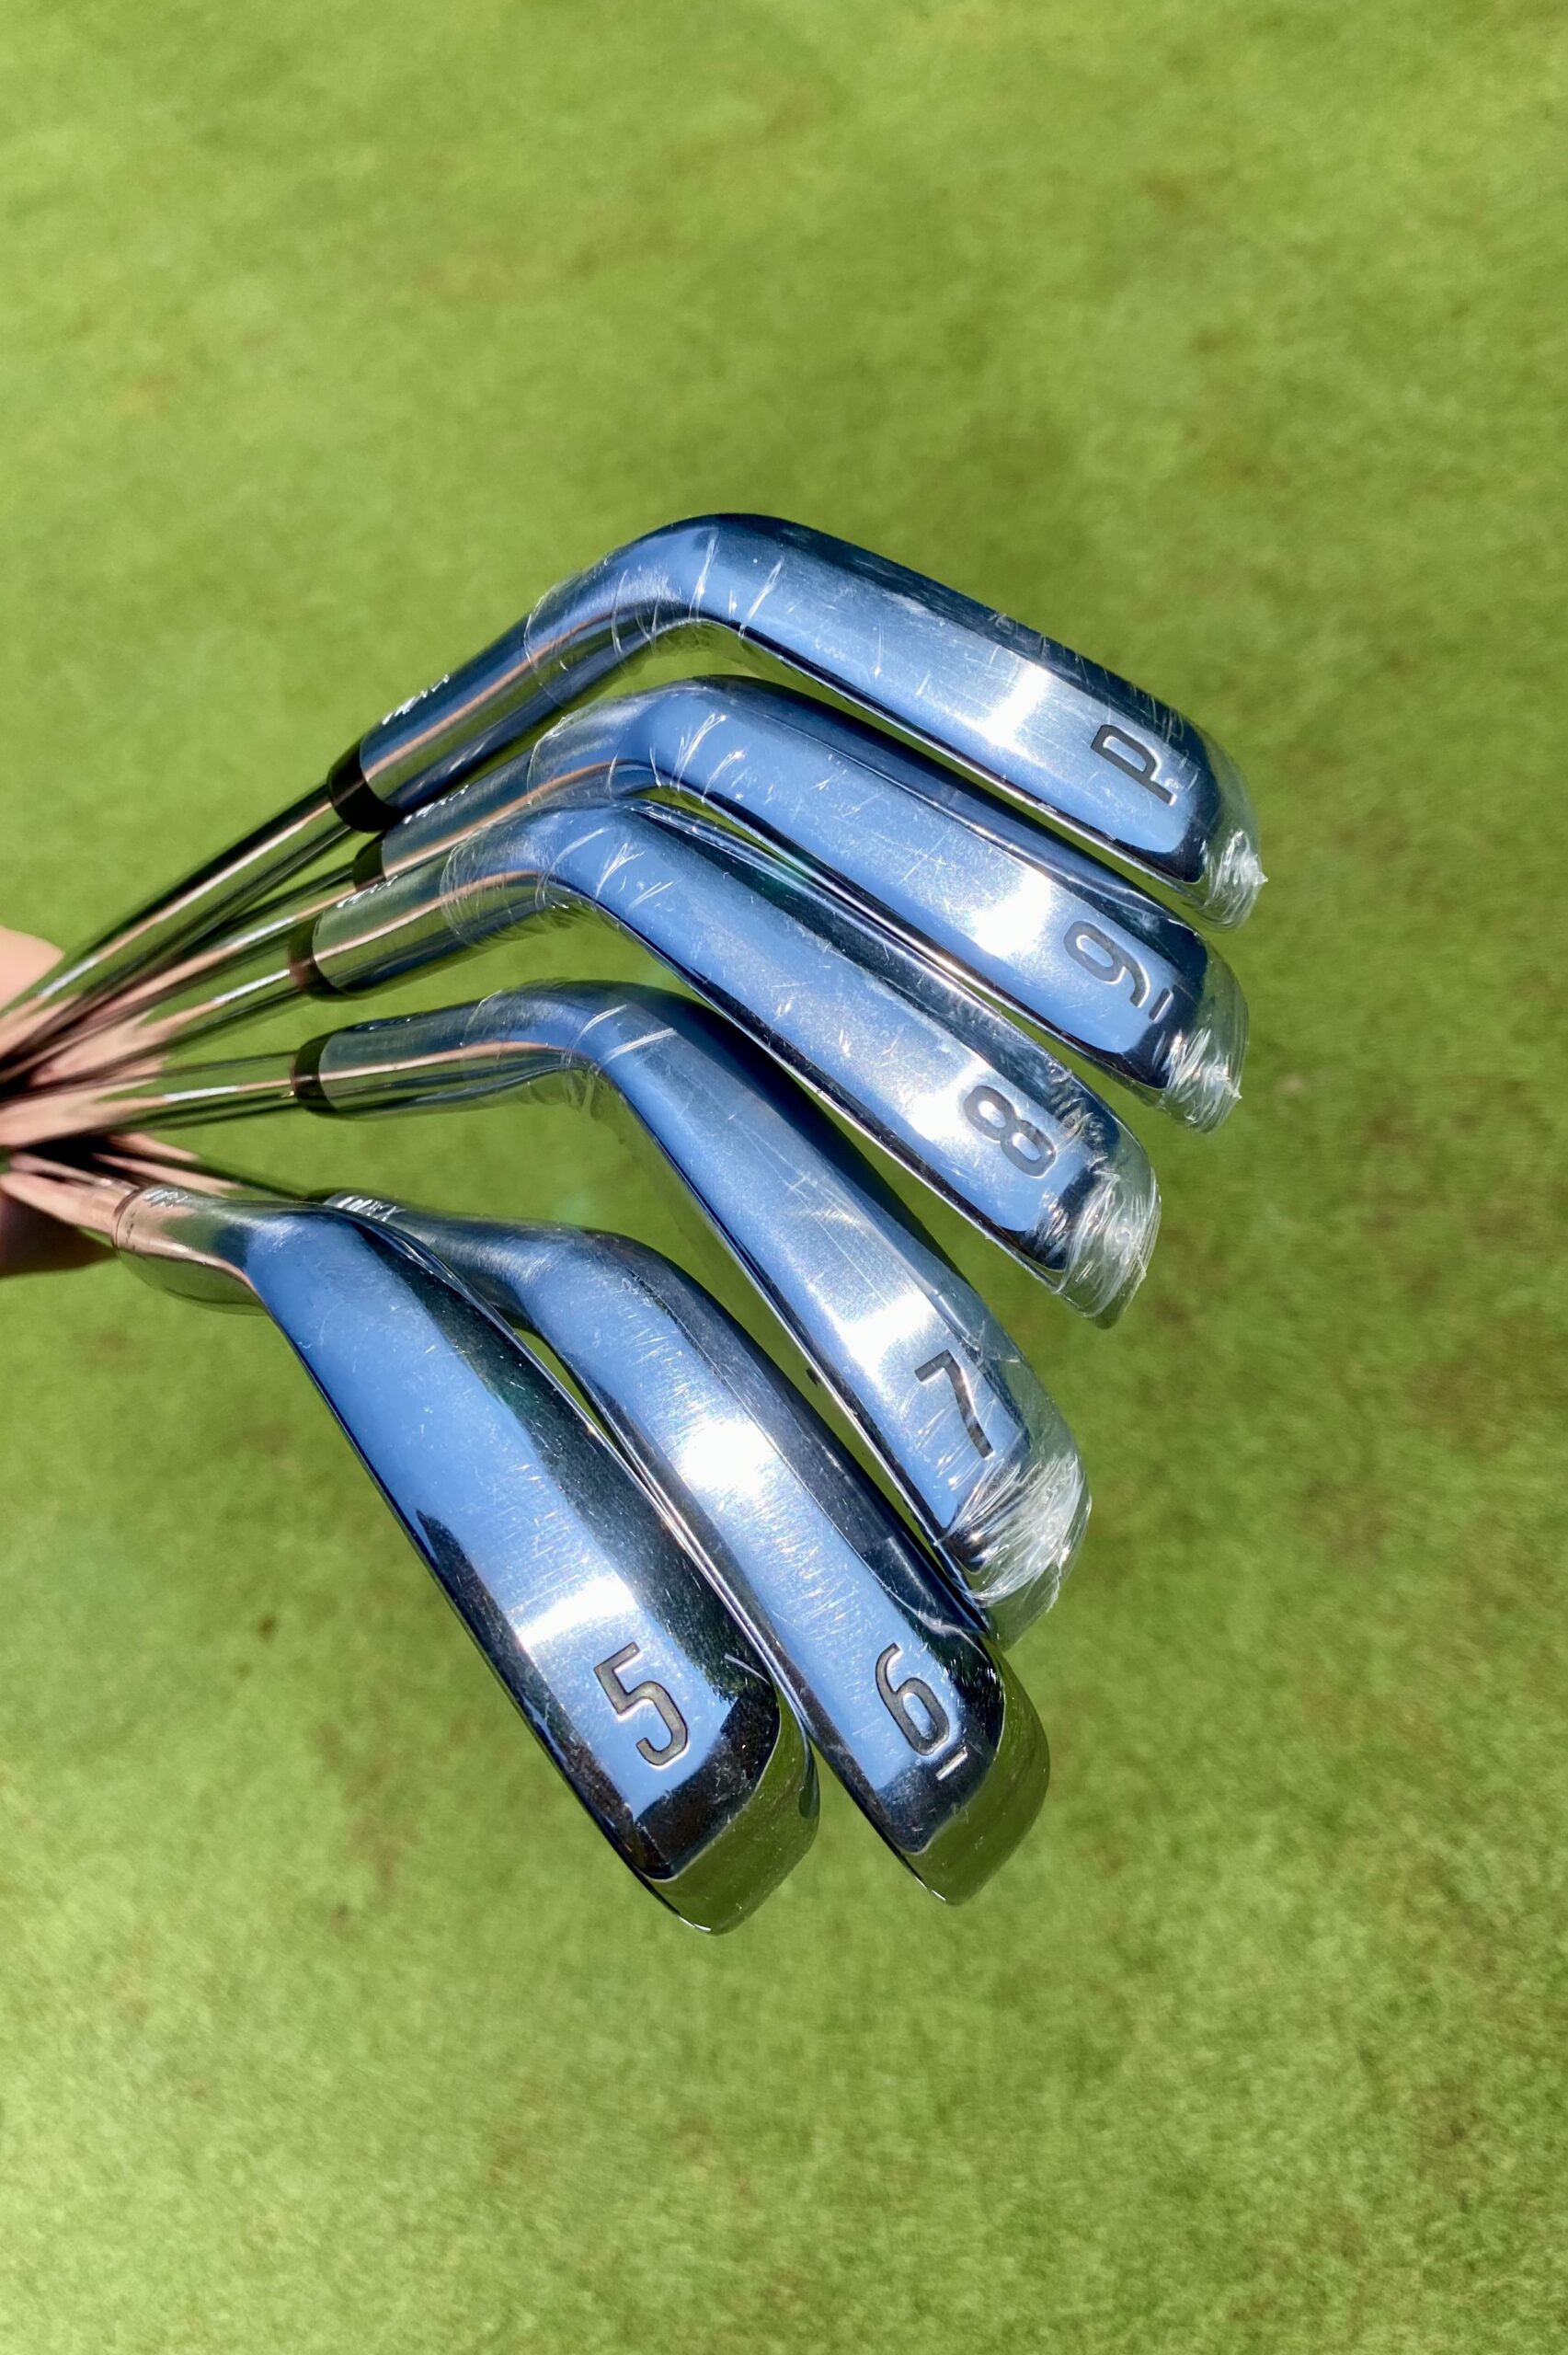 XXIO Forged from 5 to P (steel shaft) - The3Iron